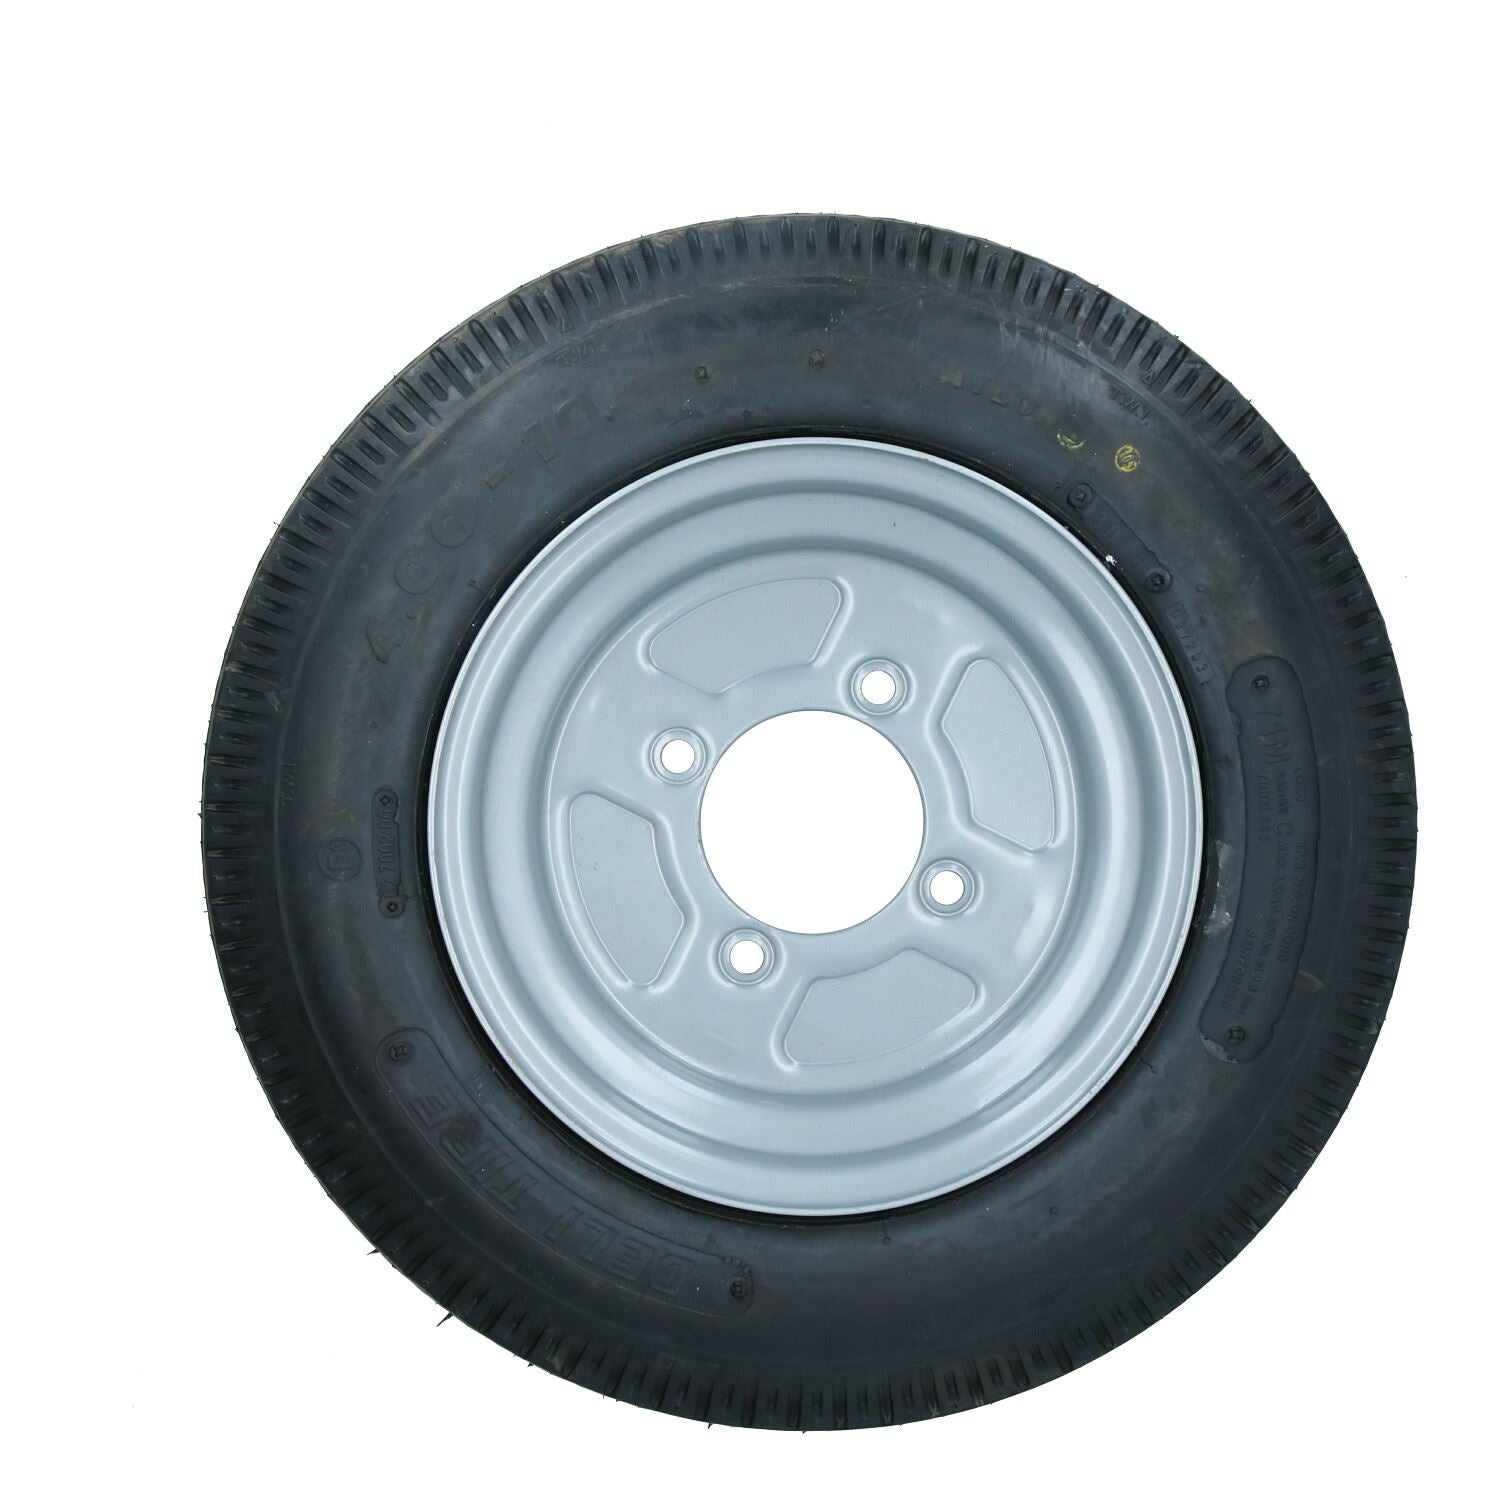 10" Trailer Wheel & Tyre 4.00-10 with 115mm PCD for Erde, Daxara 6 PLY